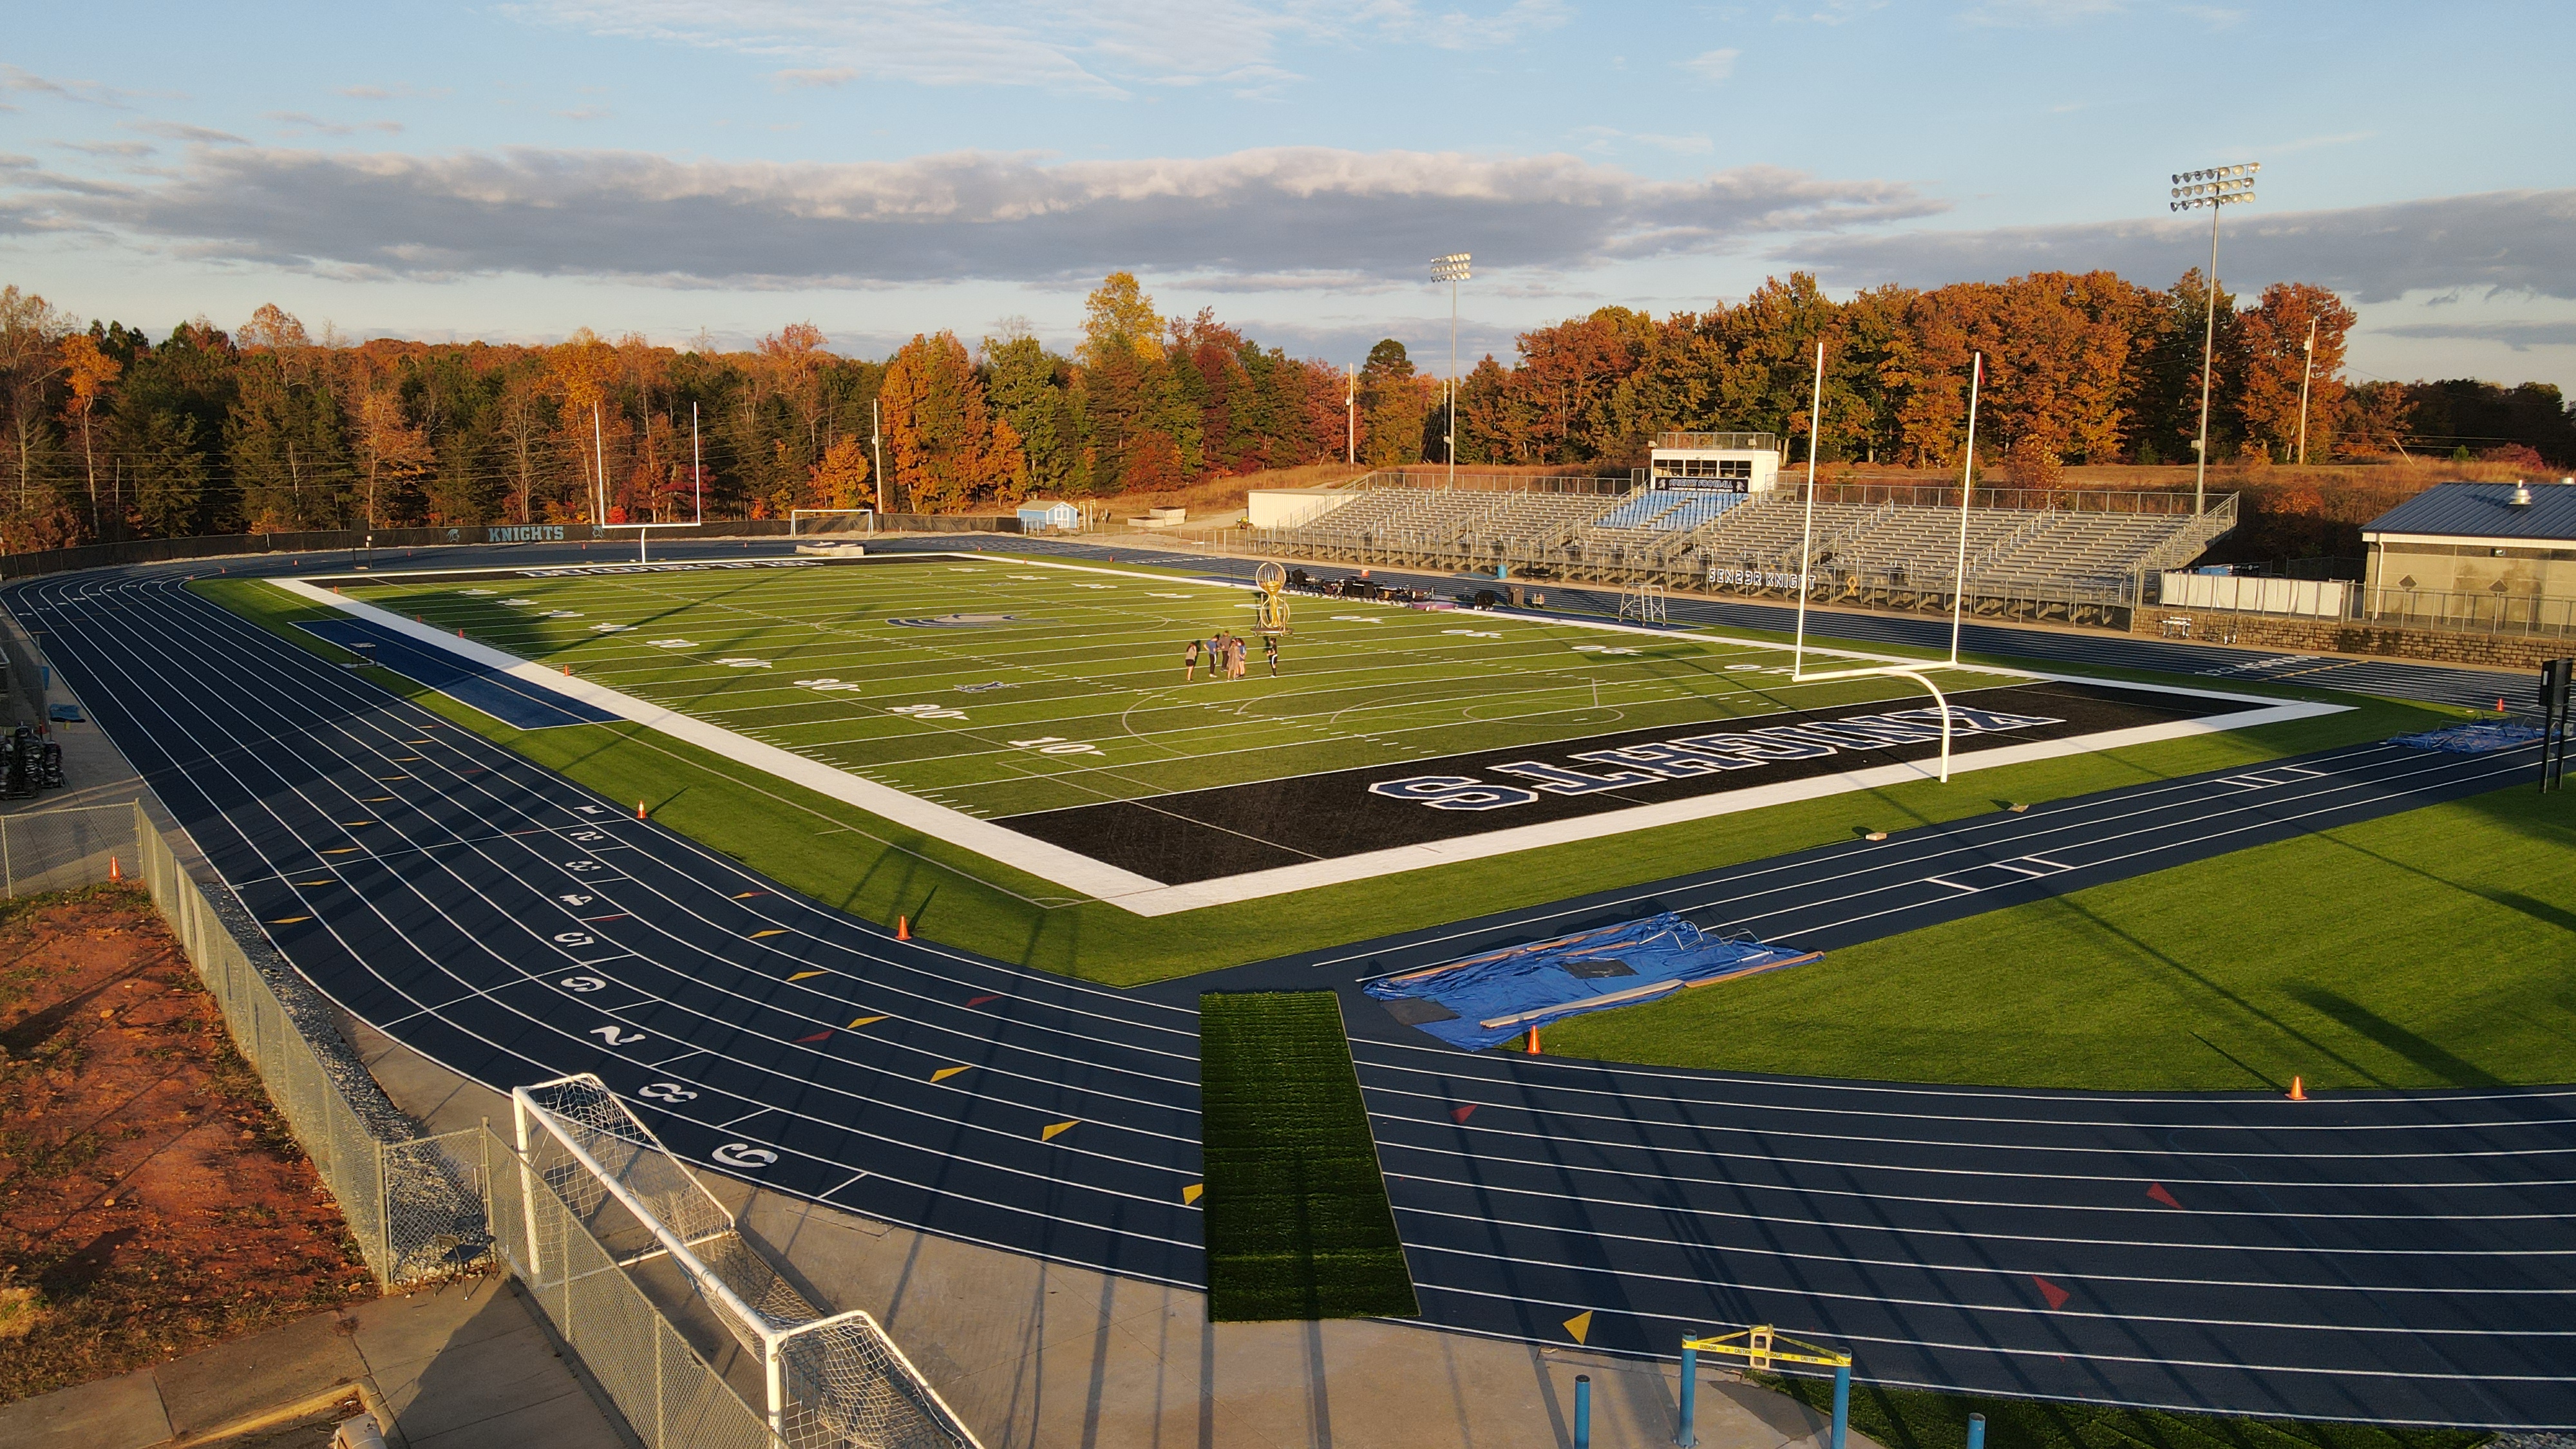 The Renovated Football Field